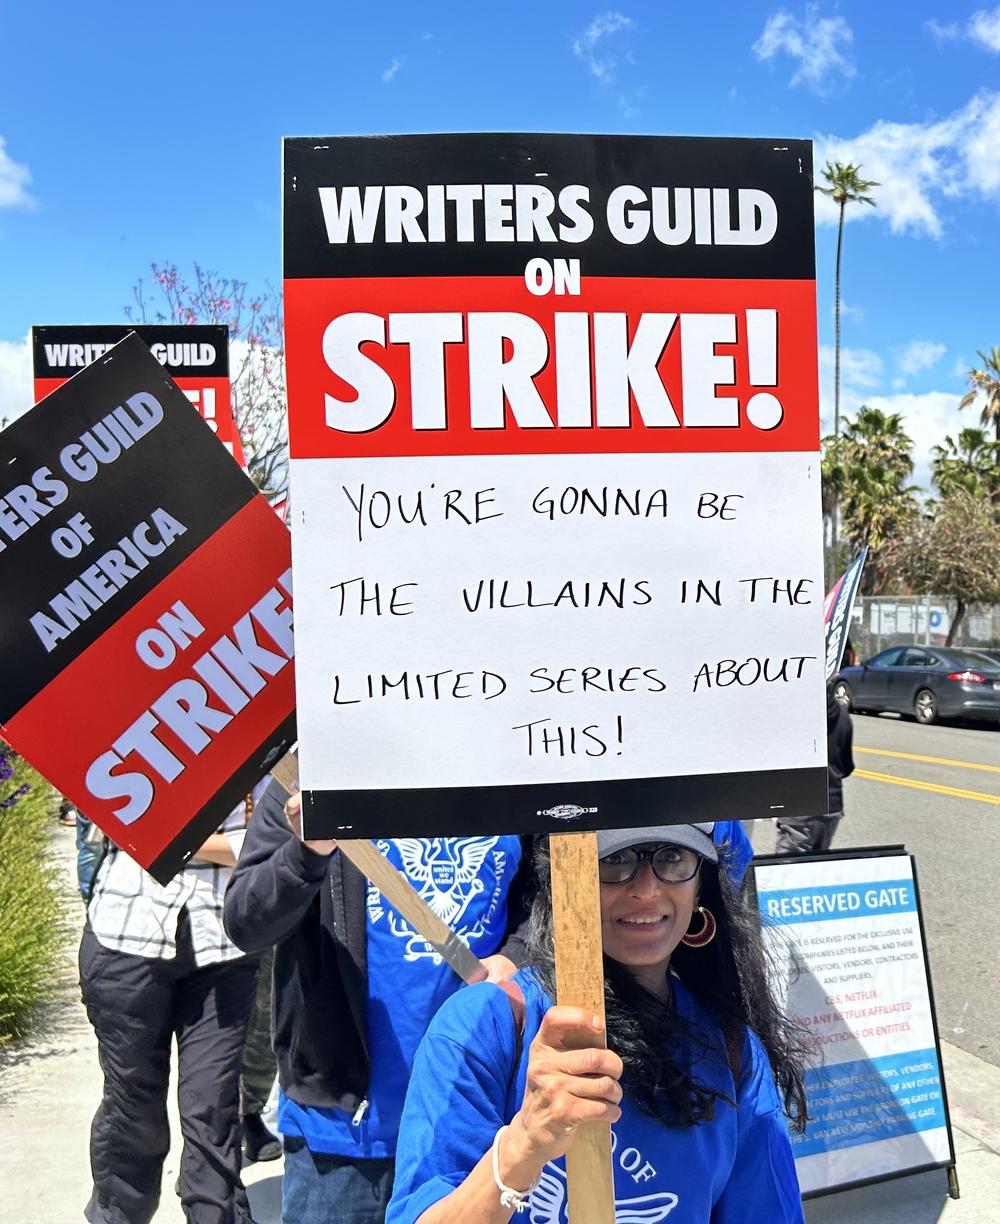 Picket signs during the Hollywood strike pointed to possible scenarios.